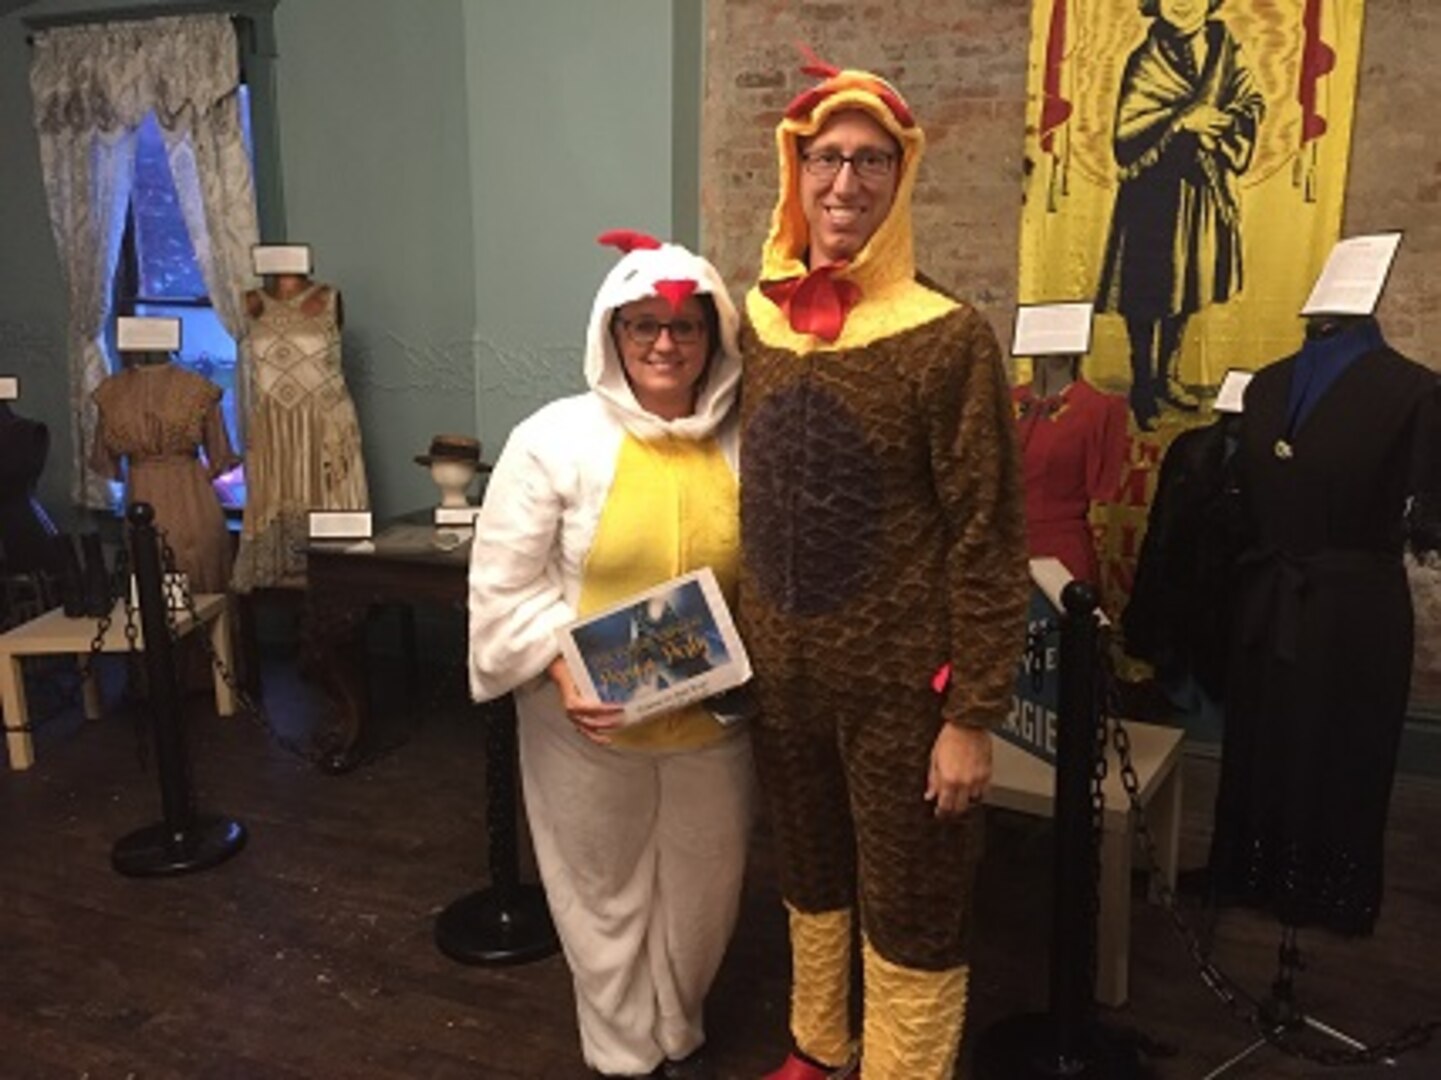 Andrew Todd and his wife, Amy volunteer at Victoria House in Baltimore, Ohio on Halloween.